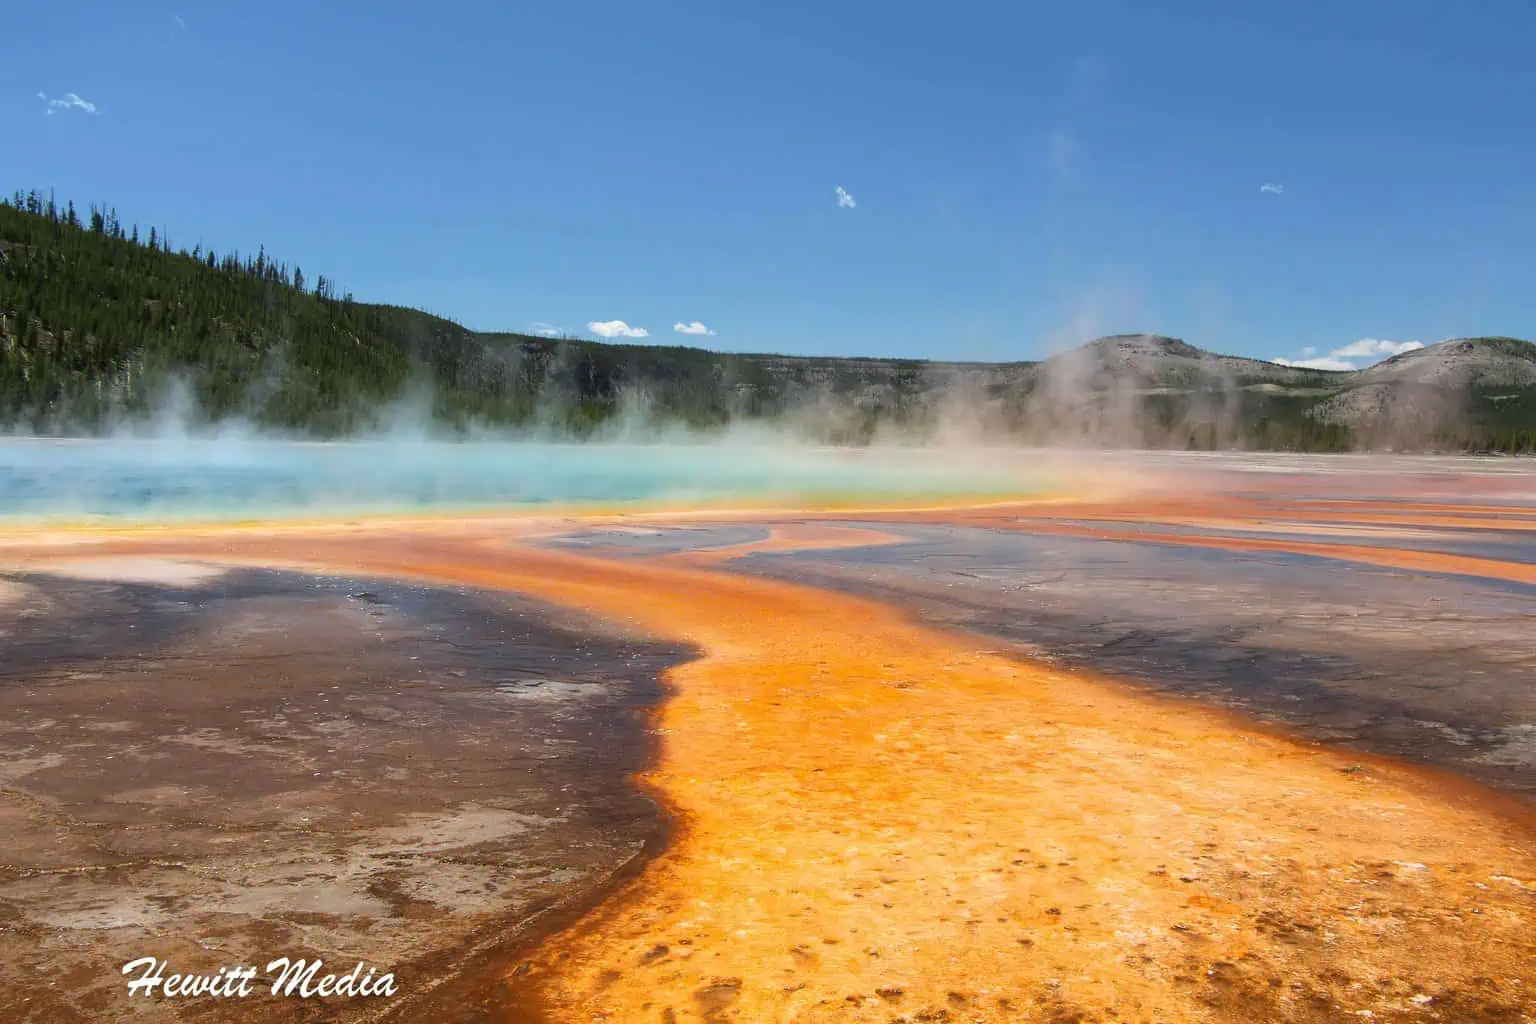 A Complete Yellowstone and Grand Teton Visitor Guide